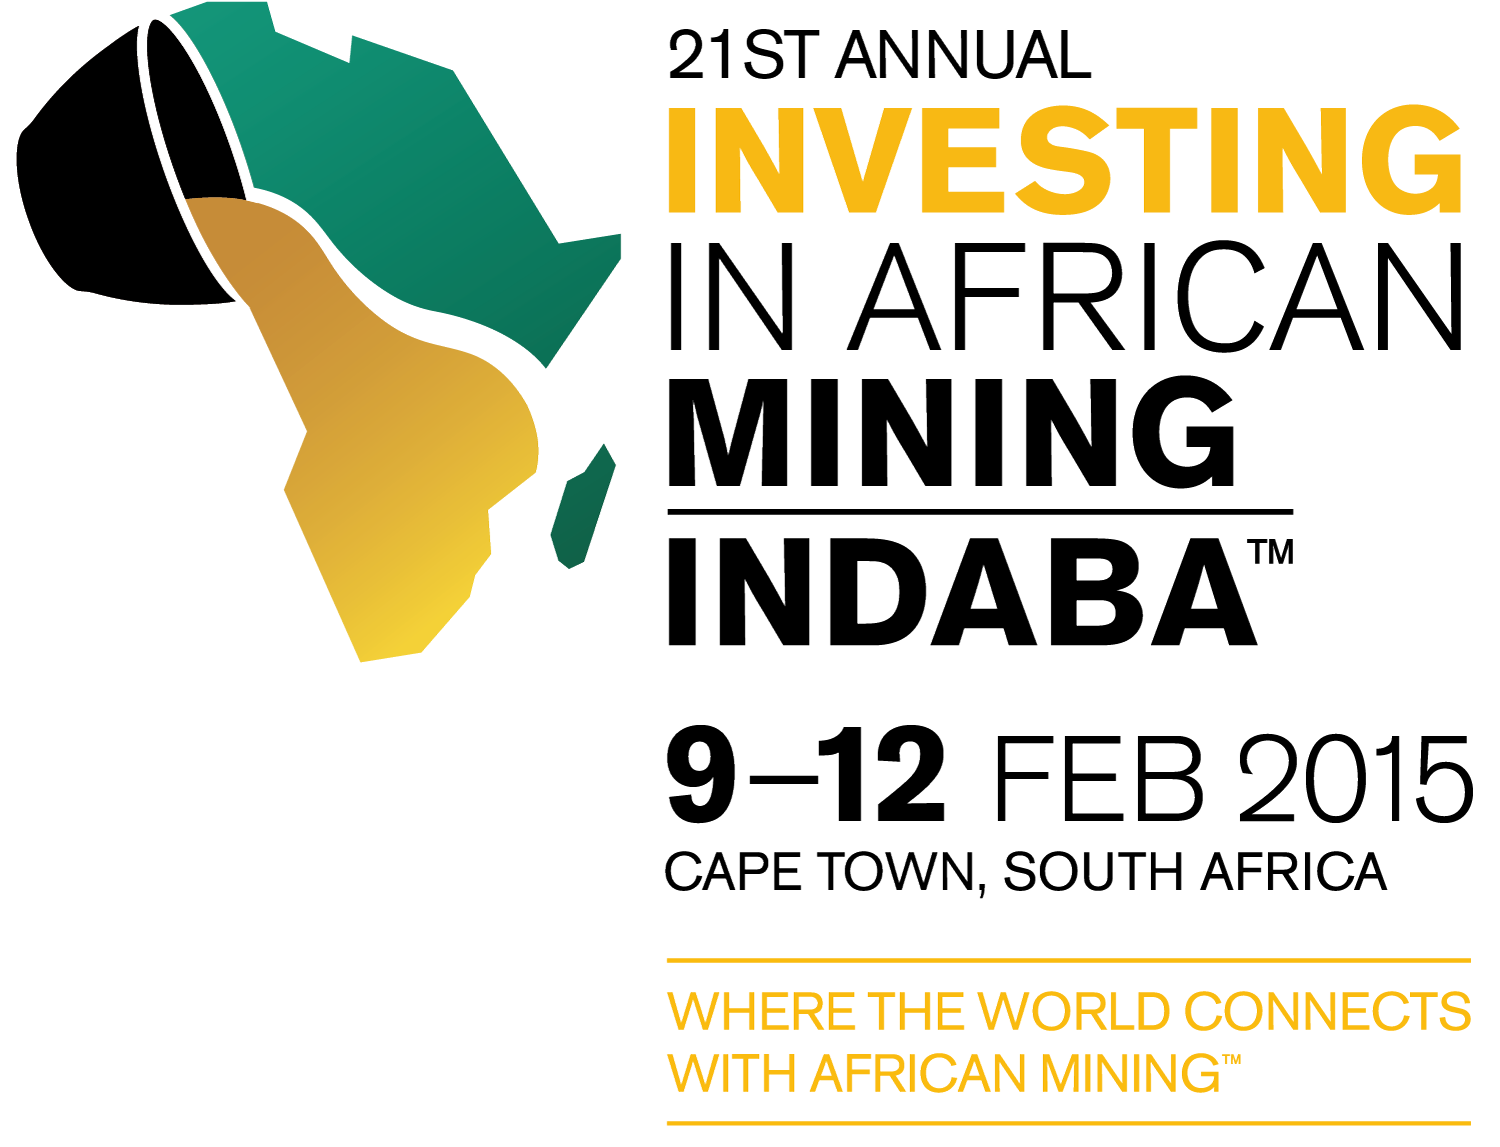 Tony Blair, Former Prime Minister of the United Kingdom, to Present a Keynote Address at the 2015 Mining Indaba